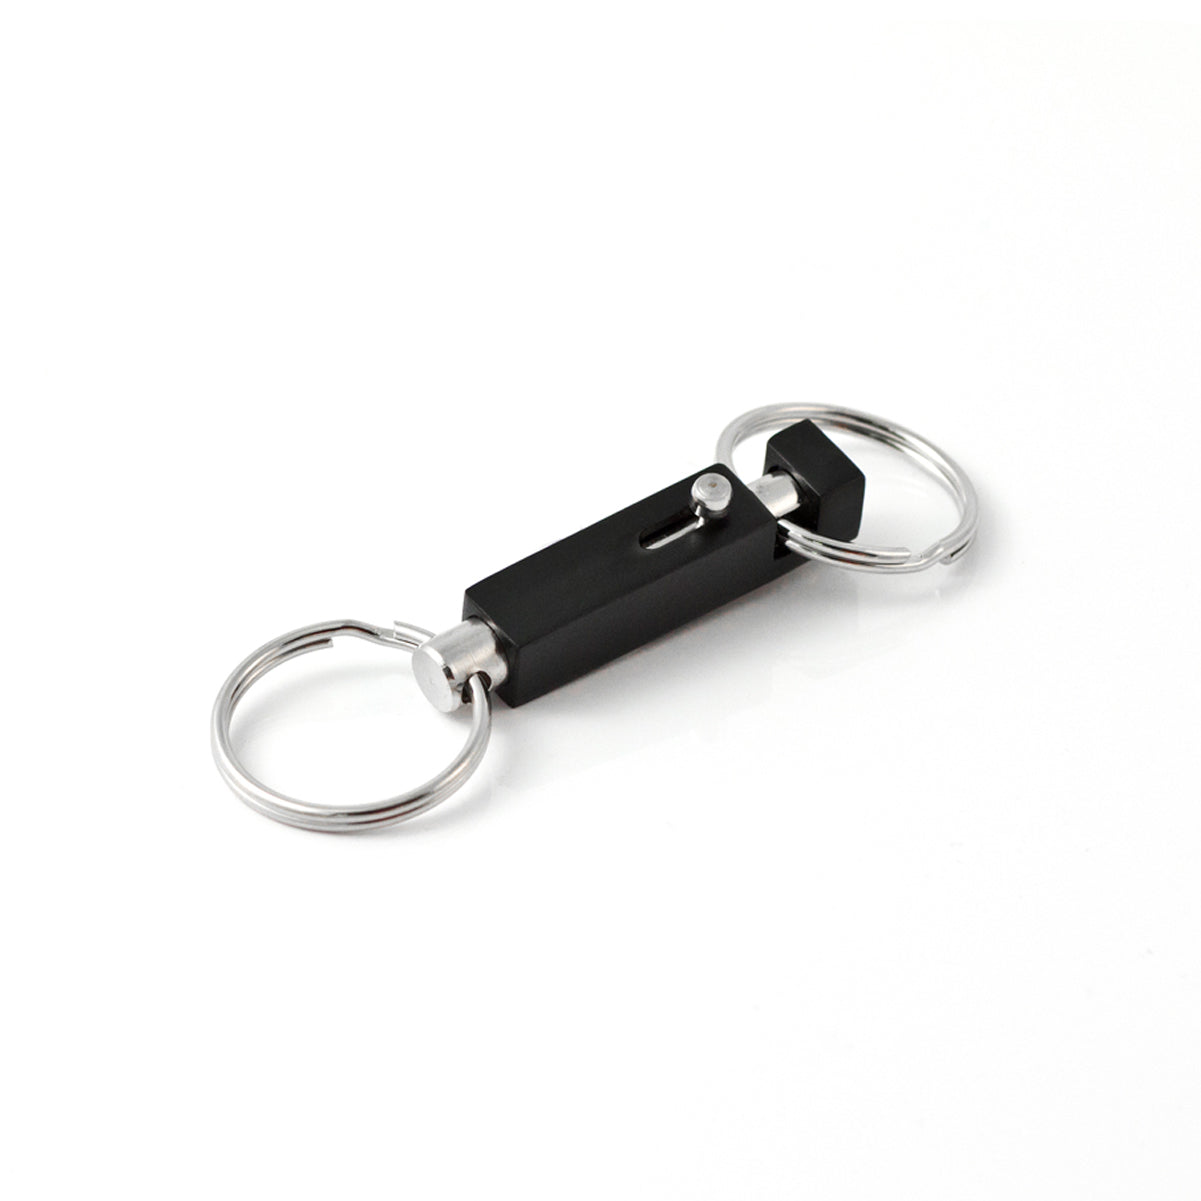 Shop for and Buy Heavy Duty Split Key Ring Nickel Plated 2 Inch